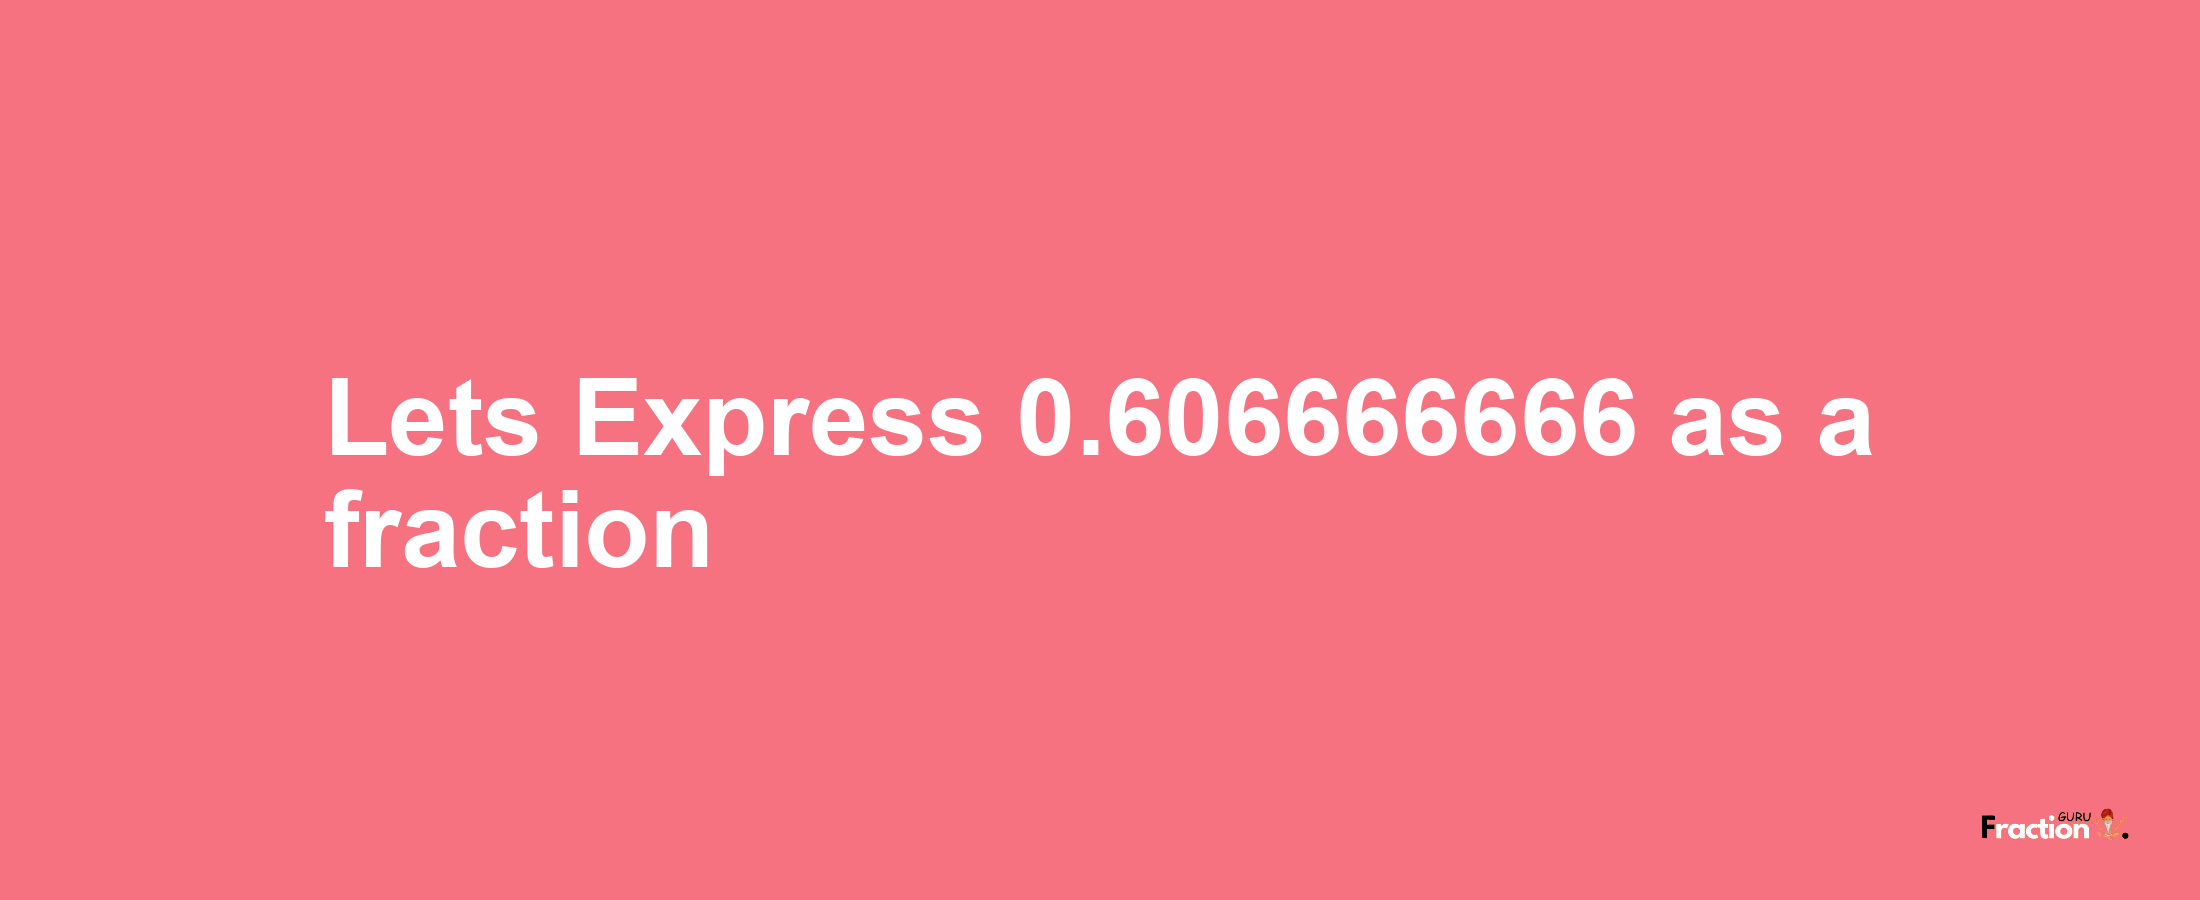 Lets Express 0.606666666 as afraction